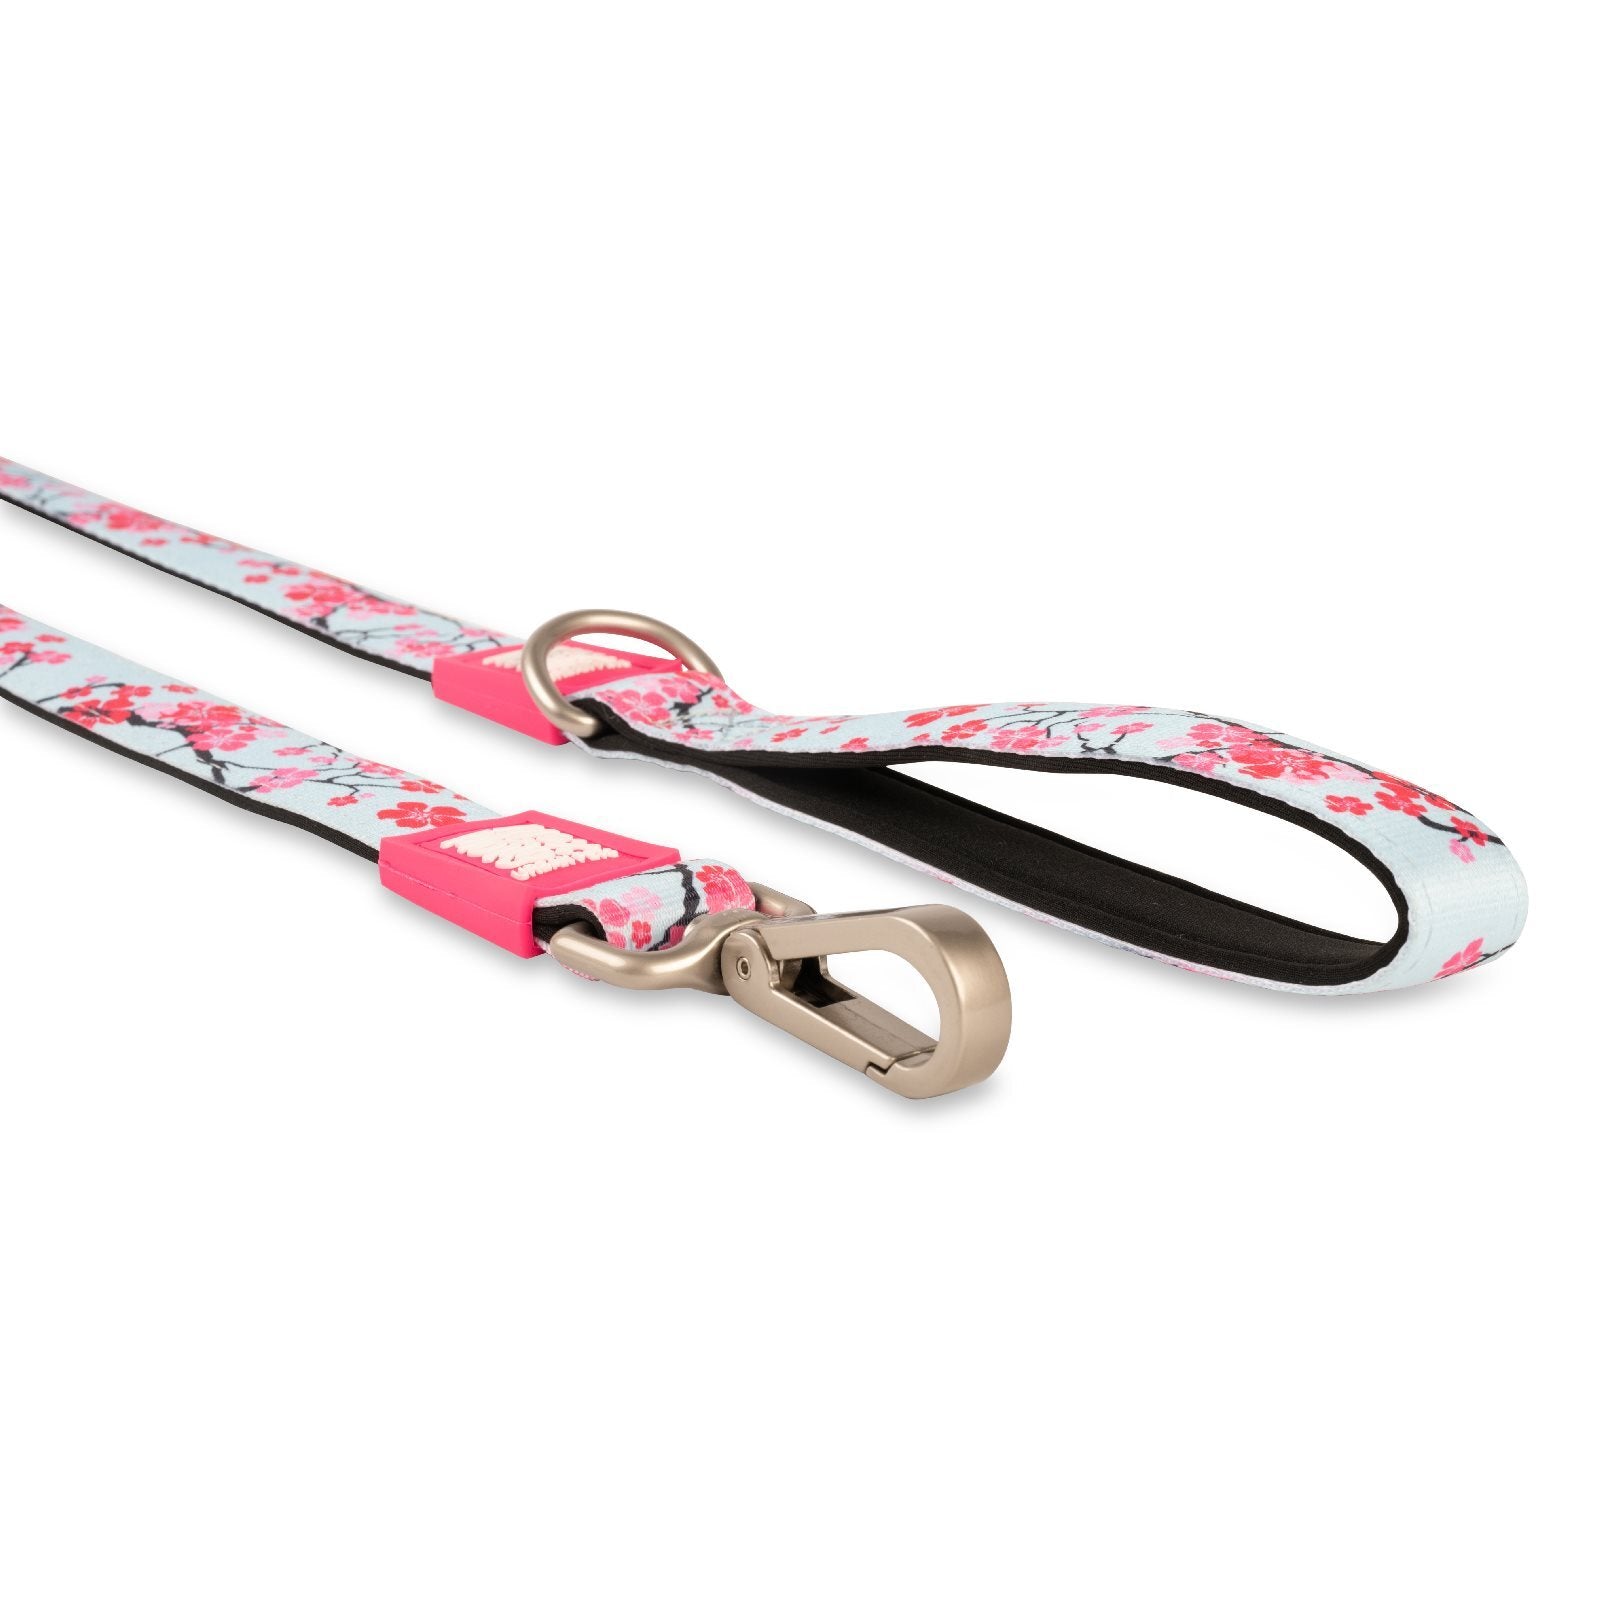 Max & Molly Dog Leash - Cherry Bloom - Pets and More